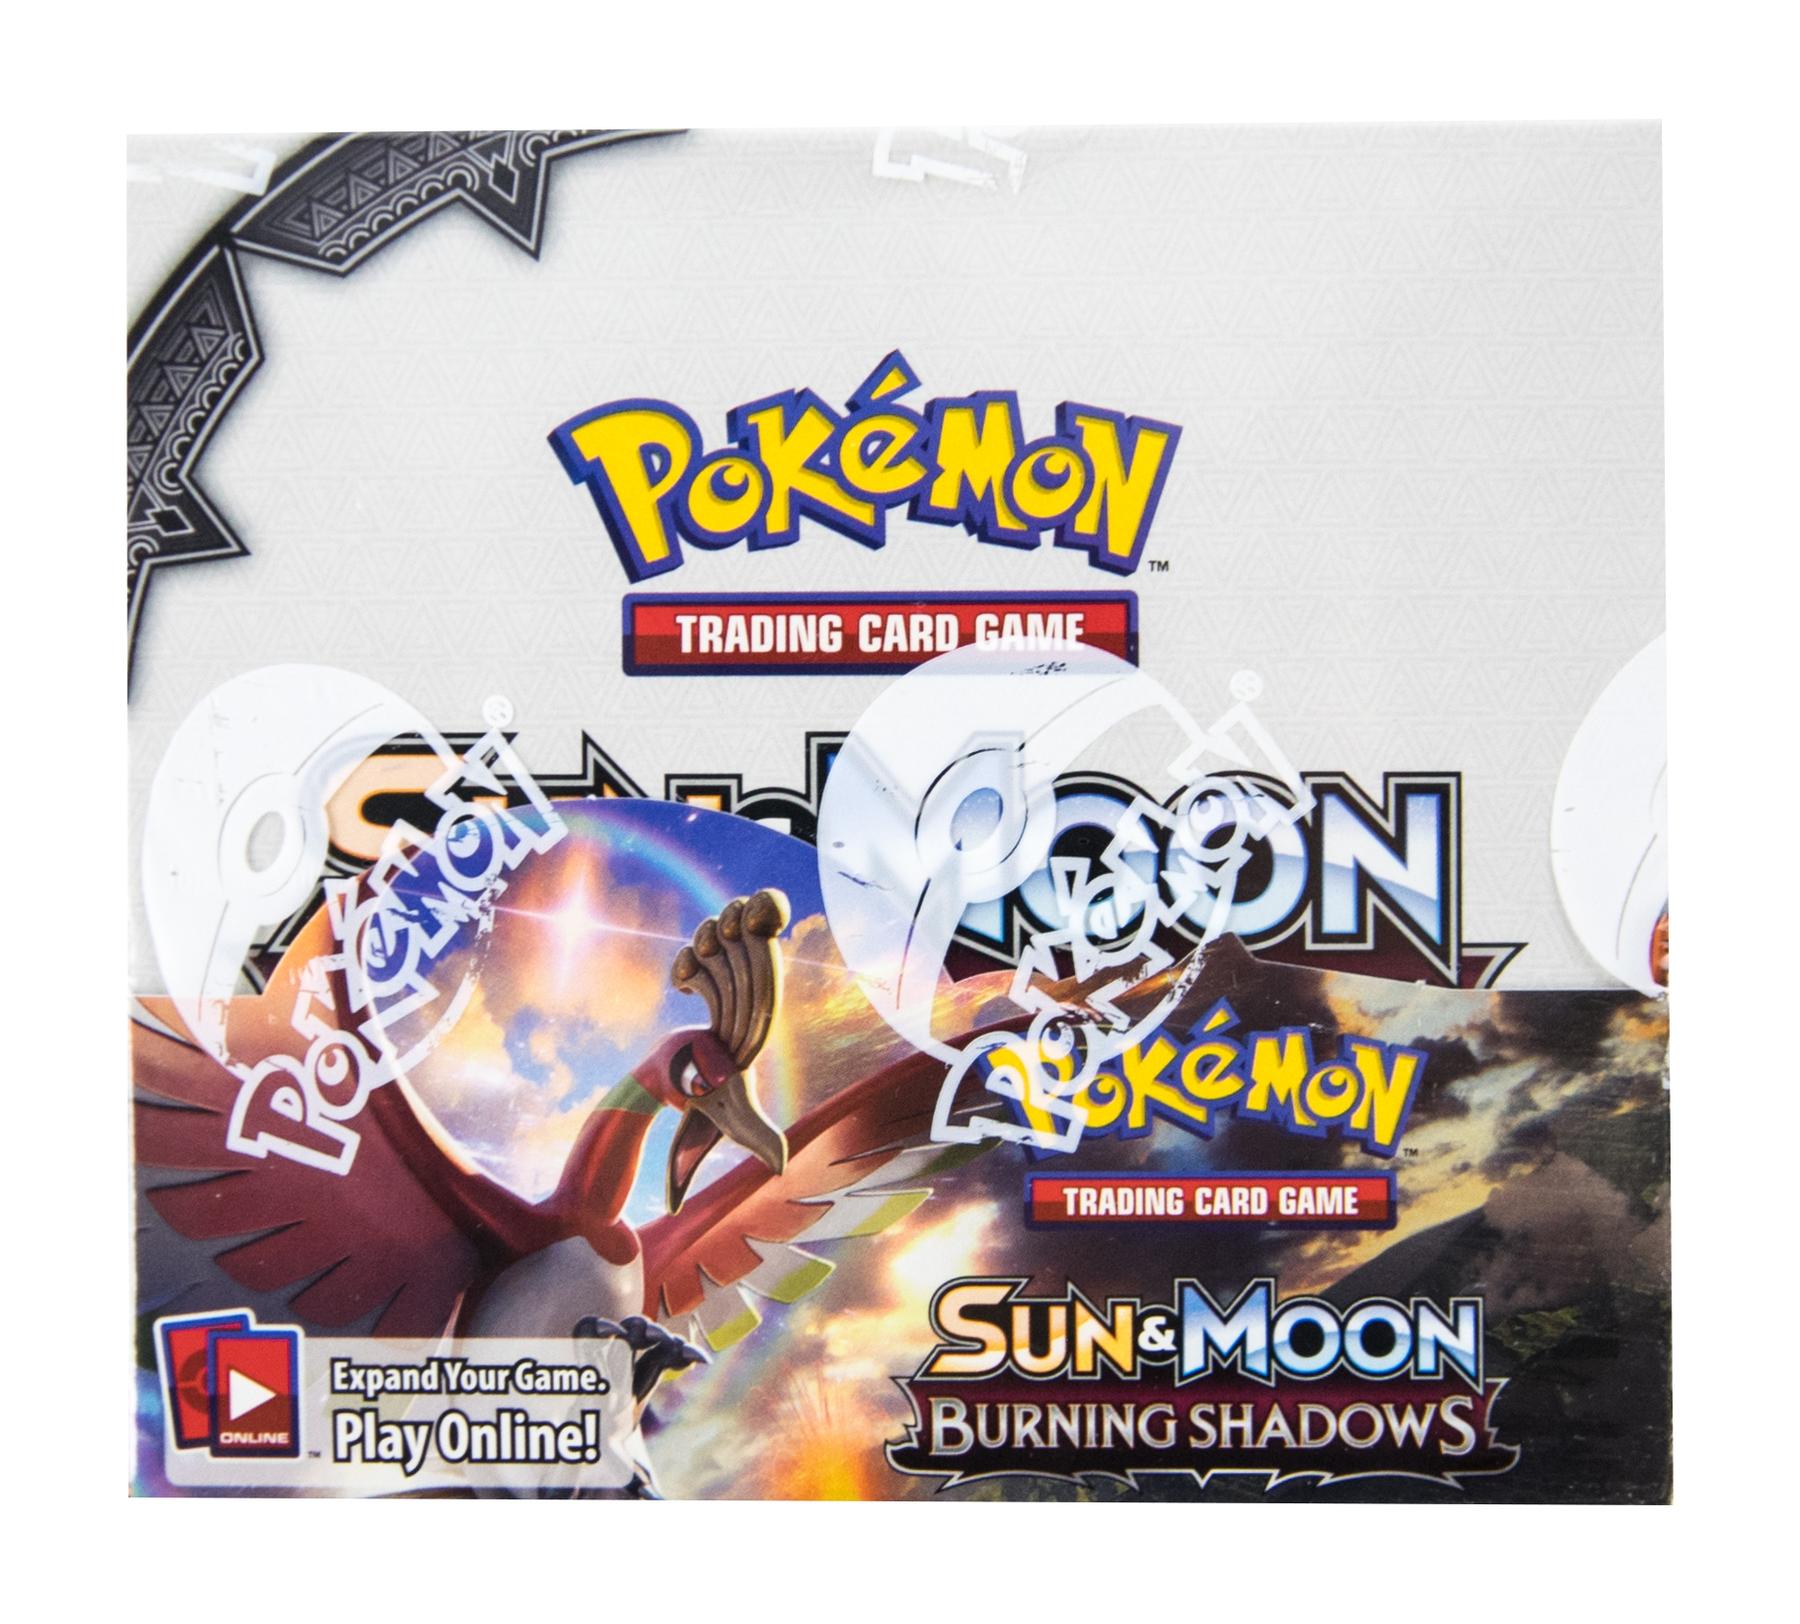 Pokémon Sun and Moon Burning Shadows GX Challenge Boxe for sale online 